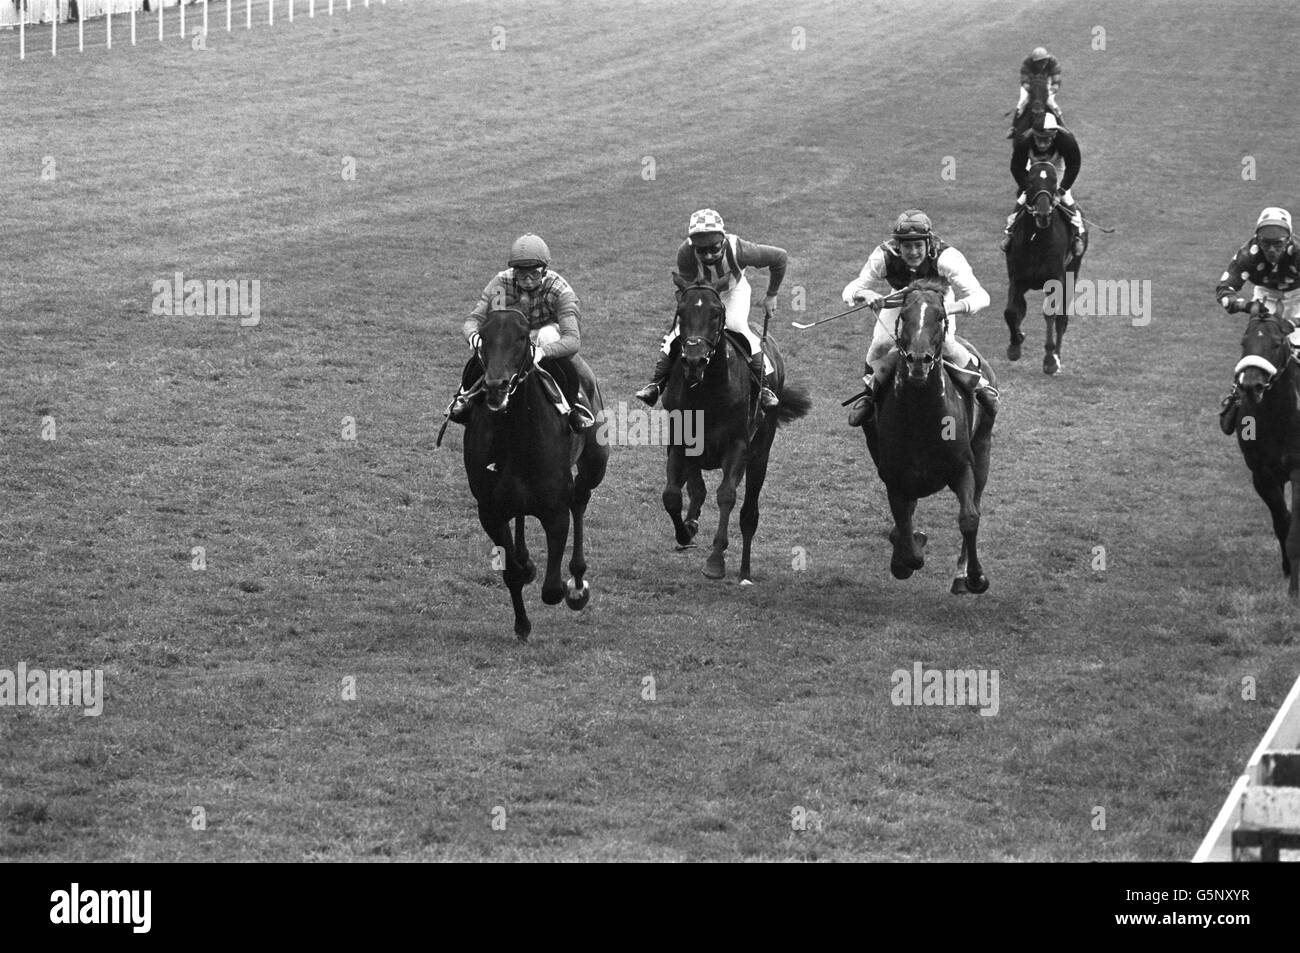 The final stretch of the Moet & Chandon Silver Magnum for amateur riders at Epsom. (l-r) Tim Easterby on Sea Pigeon, Eddie Woods on McAdam and John Hills on Humdoleila. Stock Photo